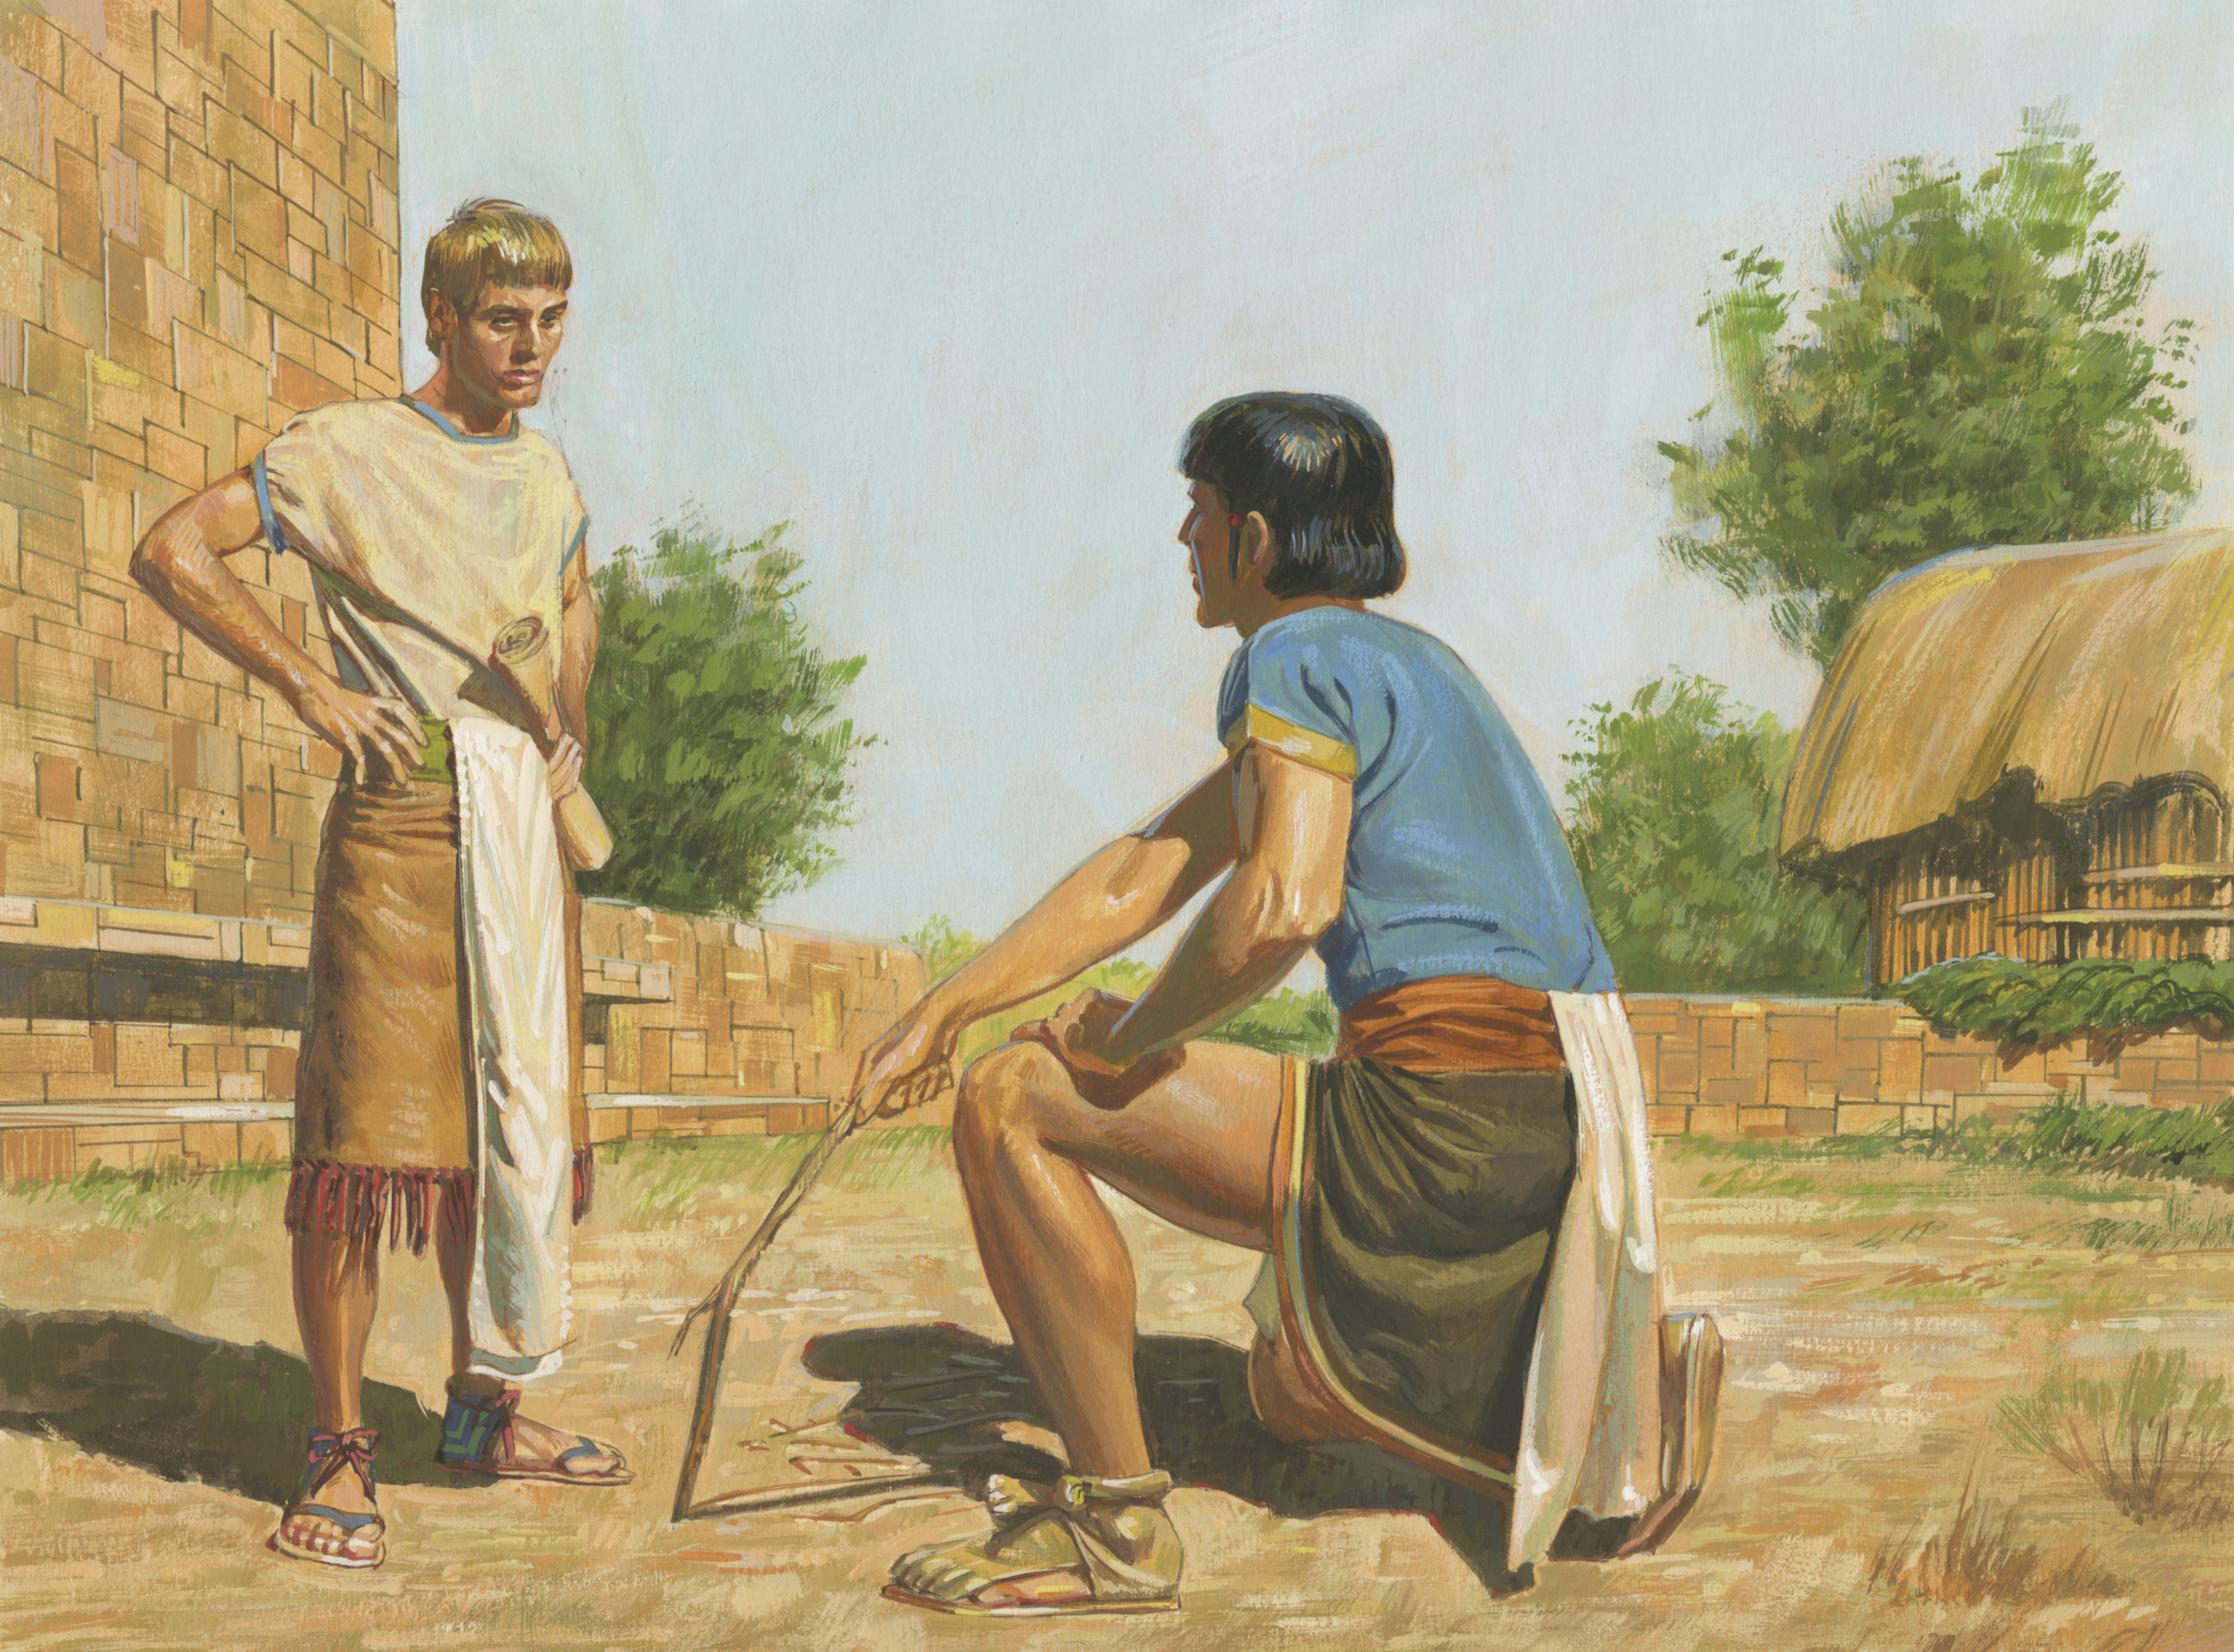 A painting by Jerry Thompson depicting Korihor admitting that he knows there is a God; Primary manual 4-35